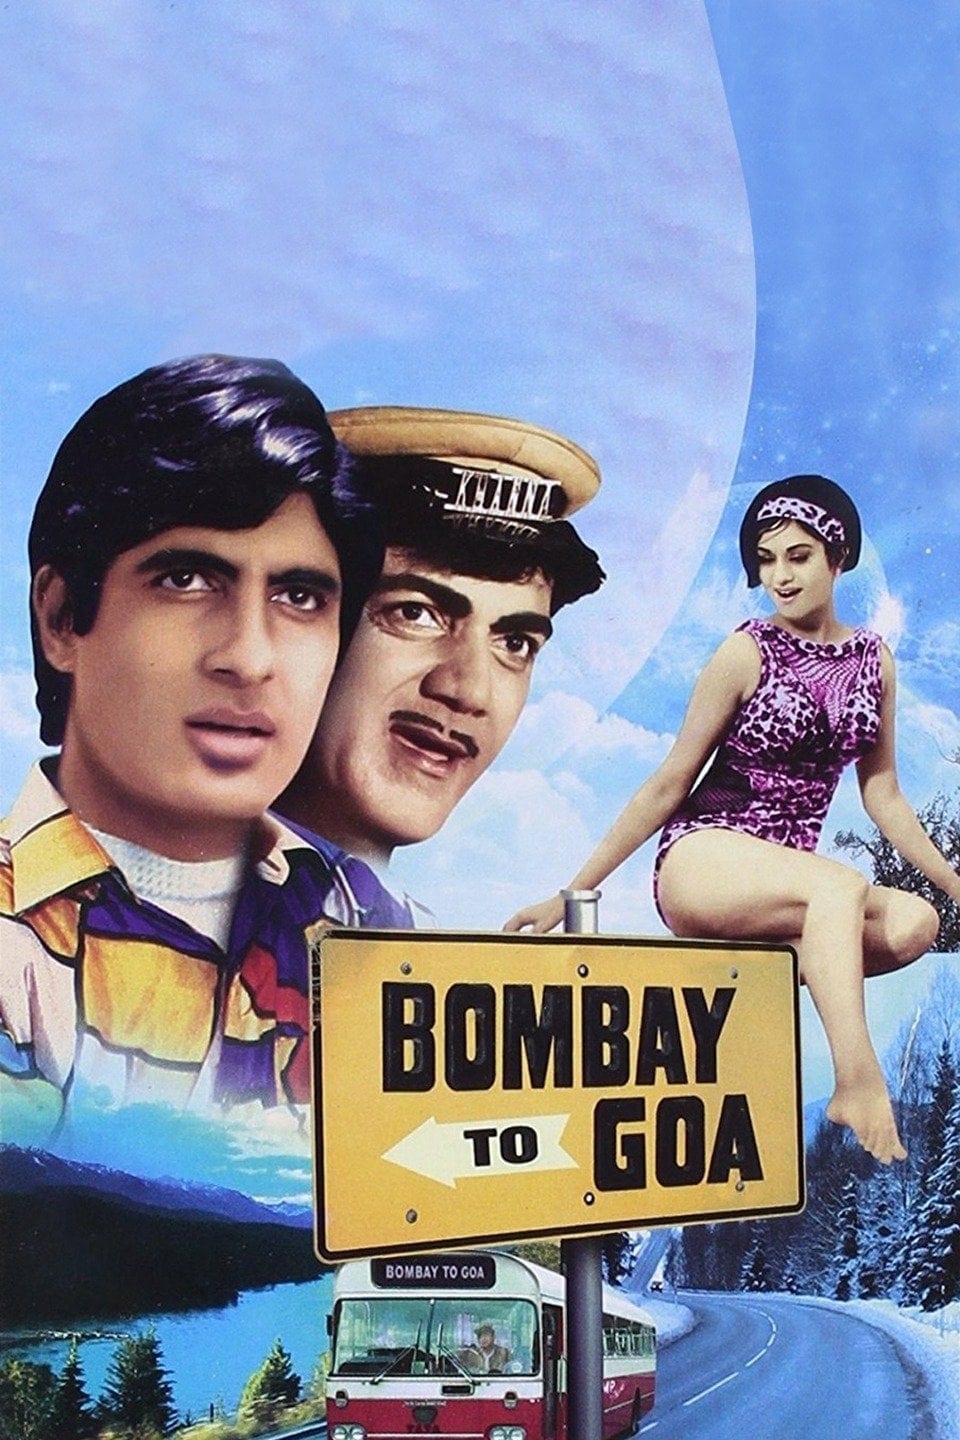 Poster for the movie "Bombay to Goa"